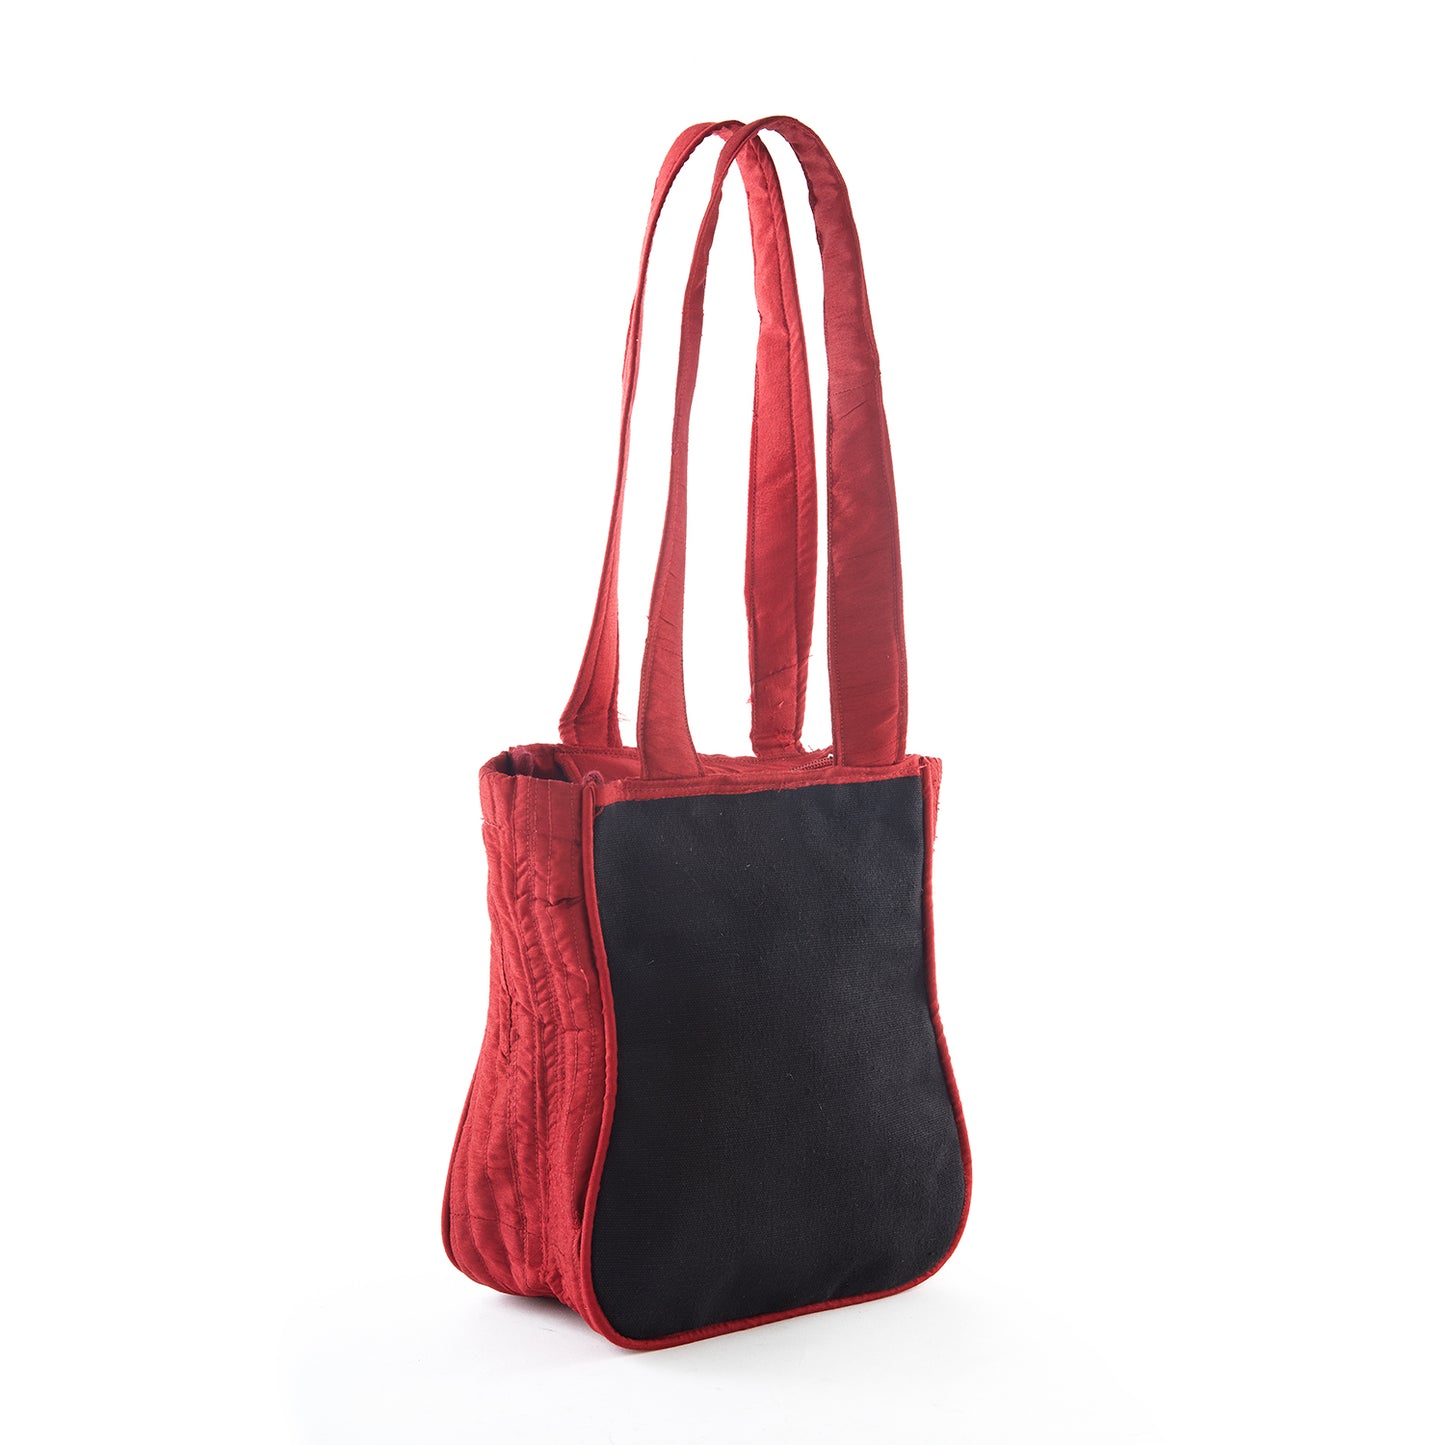 Red & Black Colored  Hand Bag - Made by People with Disabilities